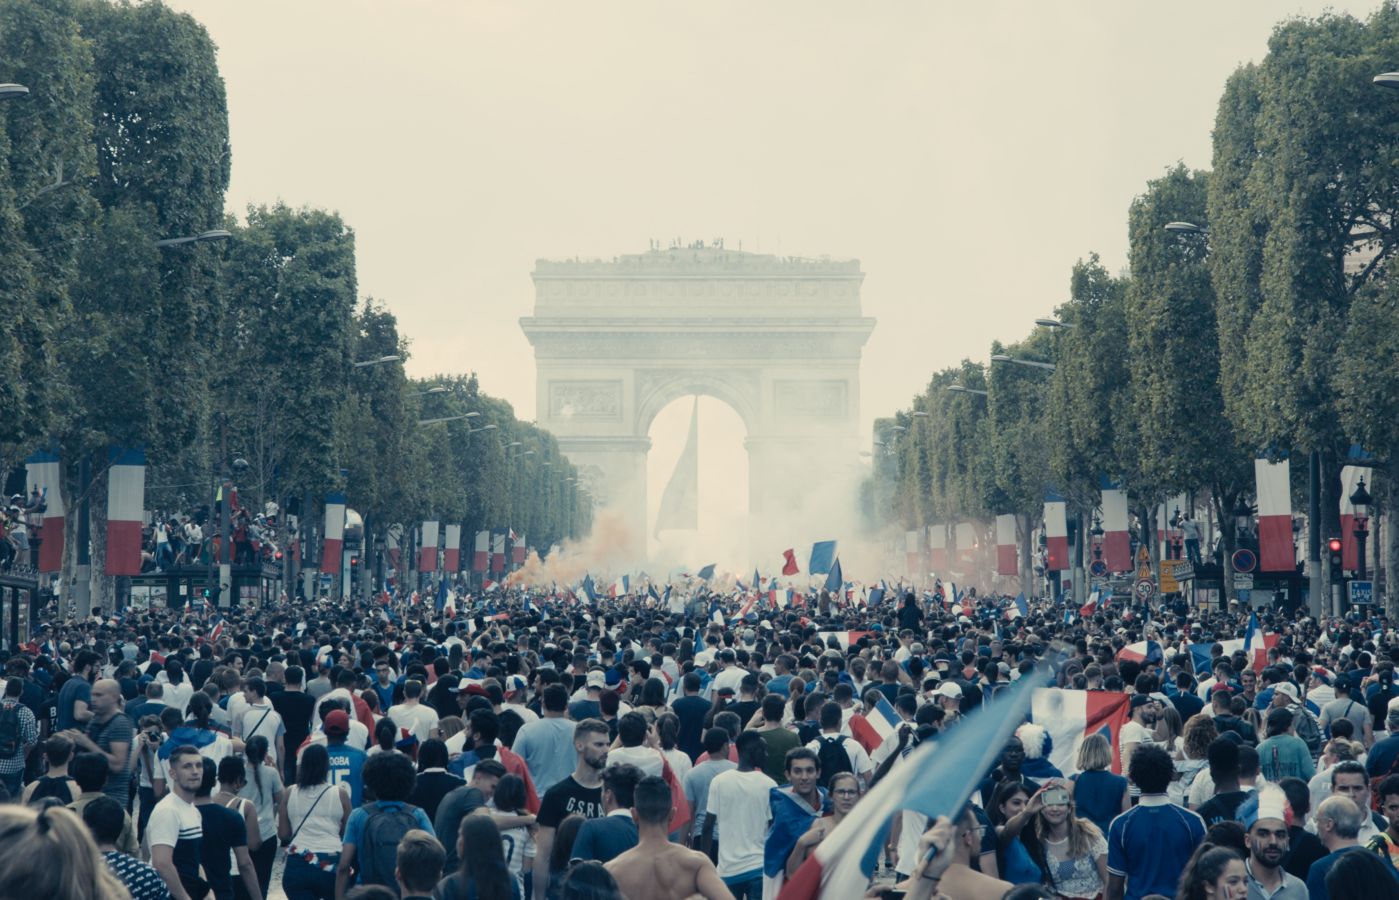 Still from Les Miserables featuring a crowd leading up to the Arc de Triomphe